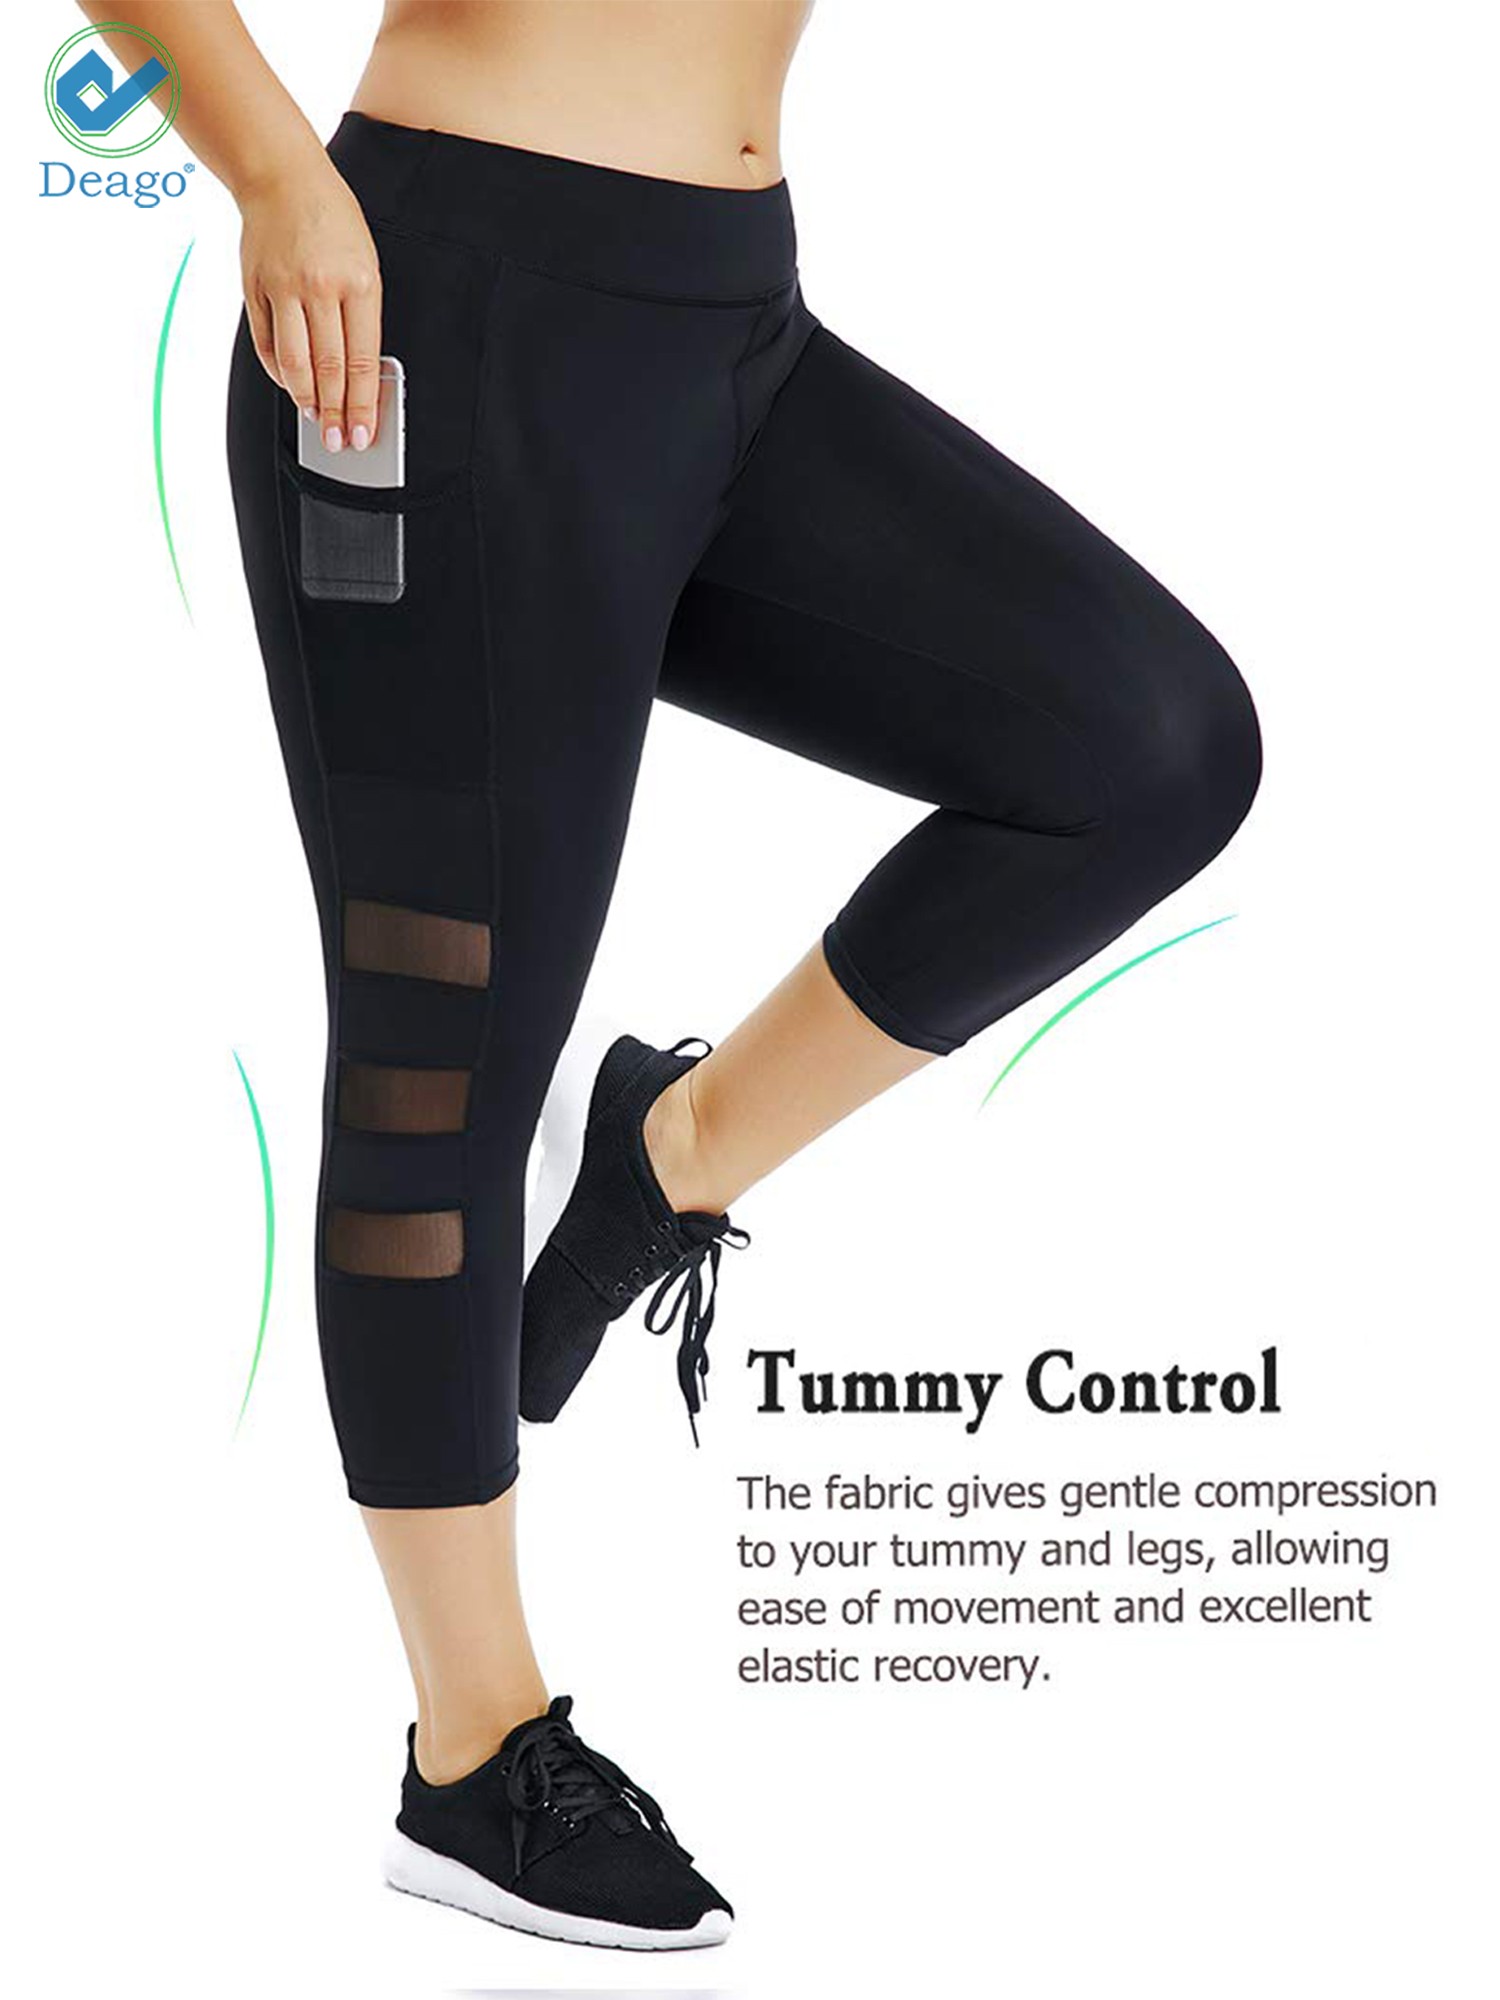 Deago Women's High Waist Yoga Pants Capri with Side Pockets Tummy Control Workout Running 4 Way Stretch Sports Leggings - image 3 of 8